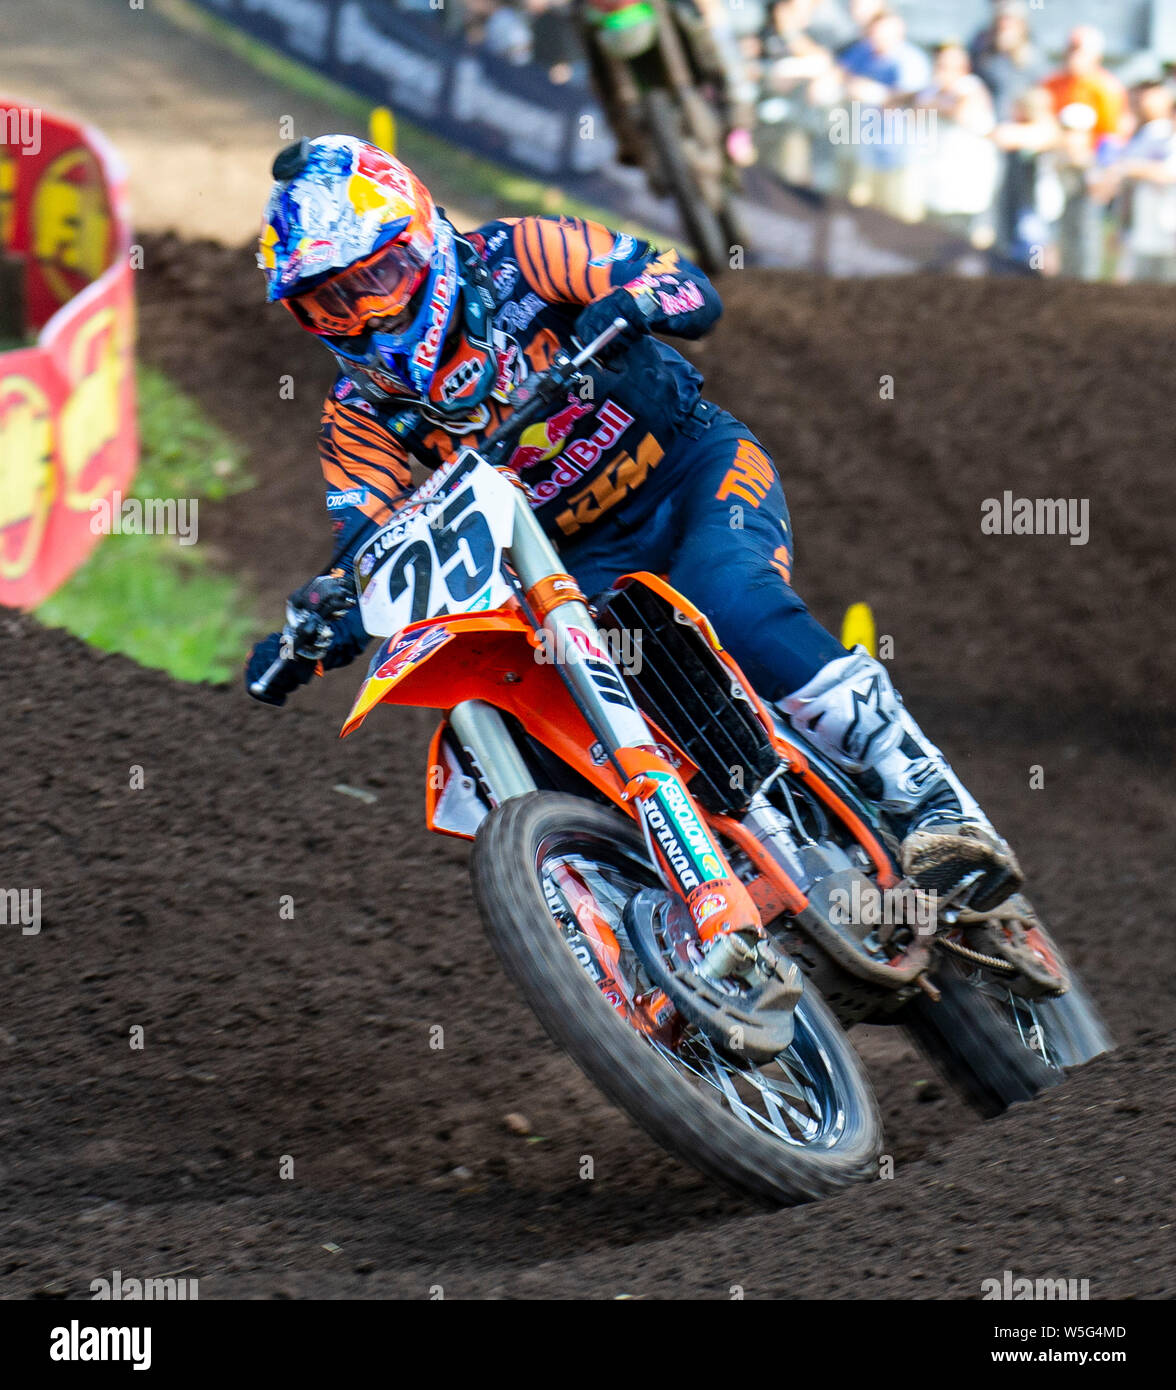 Washougal, WA USA. 27th July, 2019. # 25 Marvin Musqin coming out of section17 section during the Lucas Oil Pro Motocross Washougal National 450 class championship at Washougal MX park Washougal, WA Thurman James/CSM/Alamy Live News Stock Photo